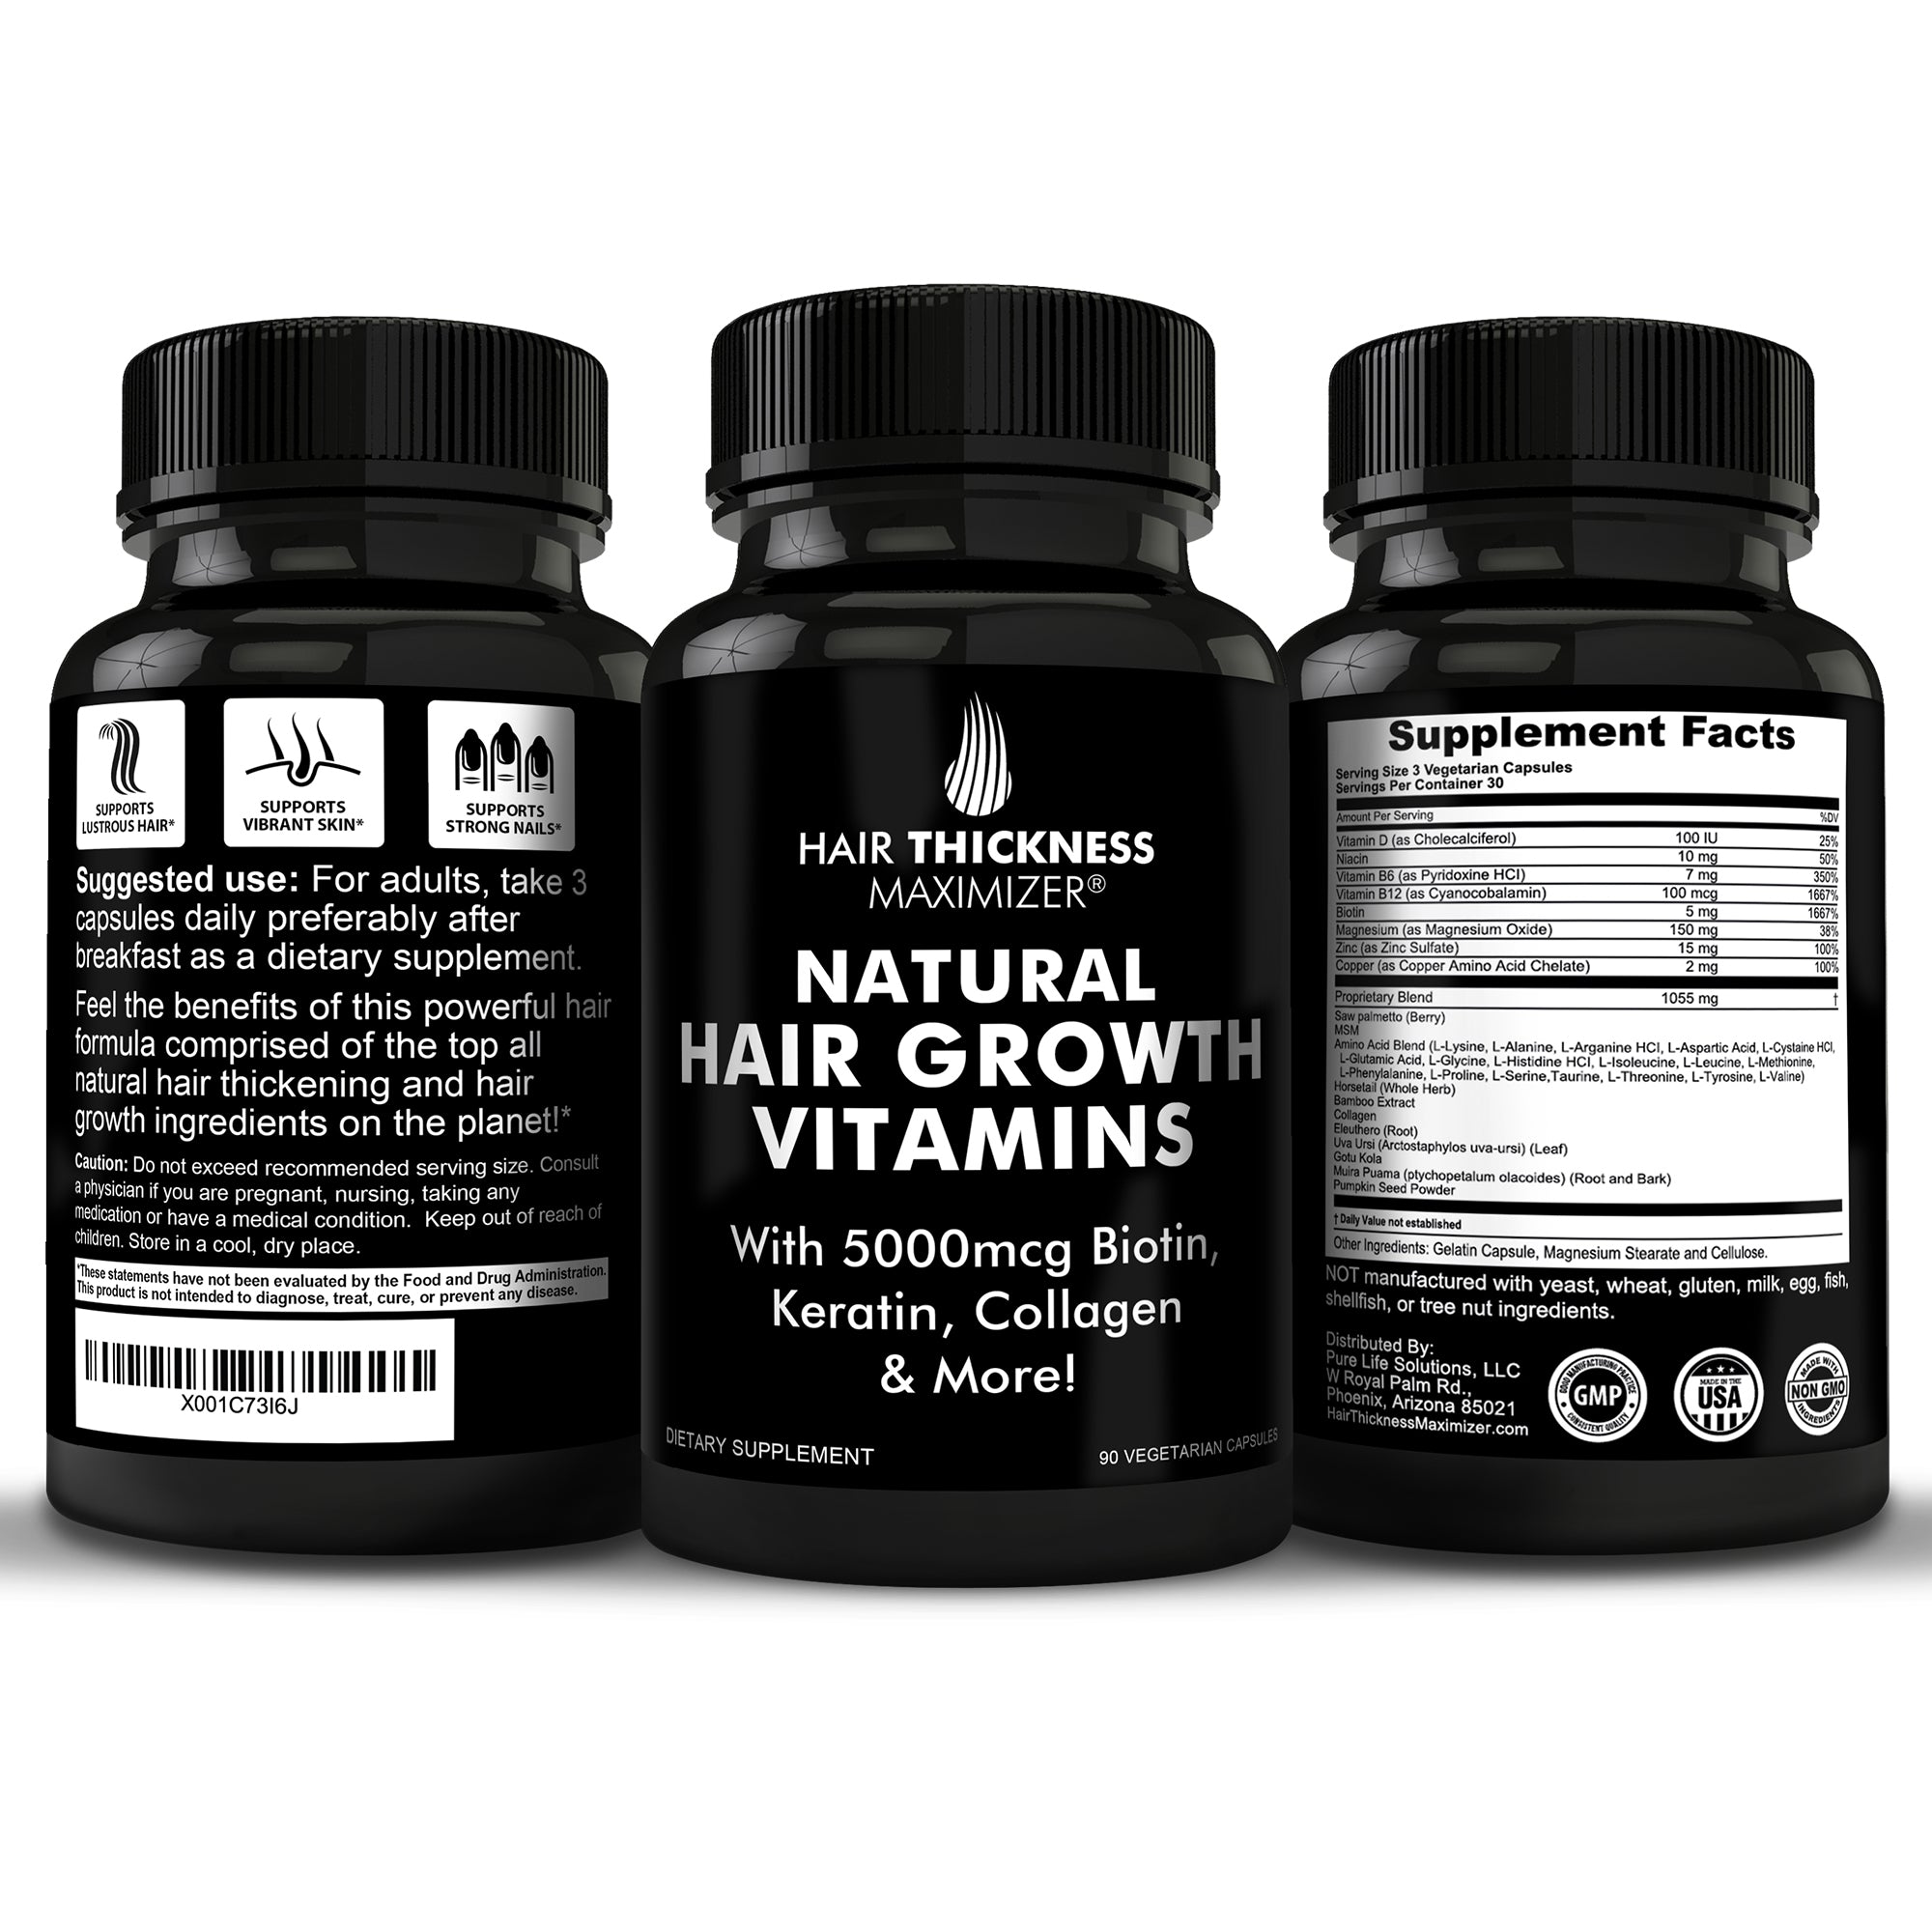 Amazon.com: Thick Hair Growth Vitamins– Hair Growth Pills With DHT Blocker  Stimulates Faster Hair Growth for Weak, Thinning Hair–Biotin Hair  Supplements with Keratin & Collagen Helps Men&Women Grow Perfect Hair. :  Beauty